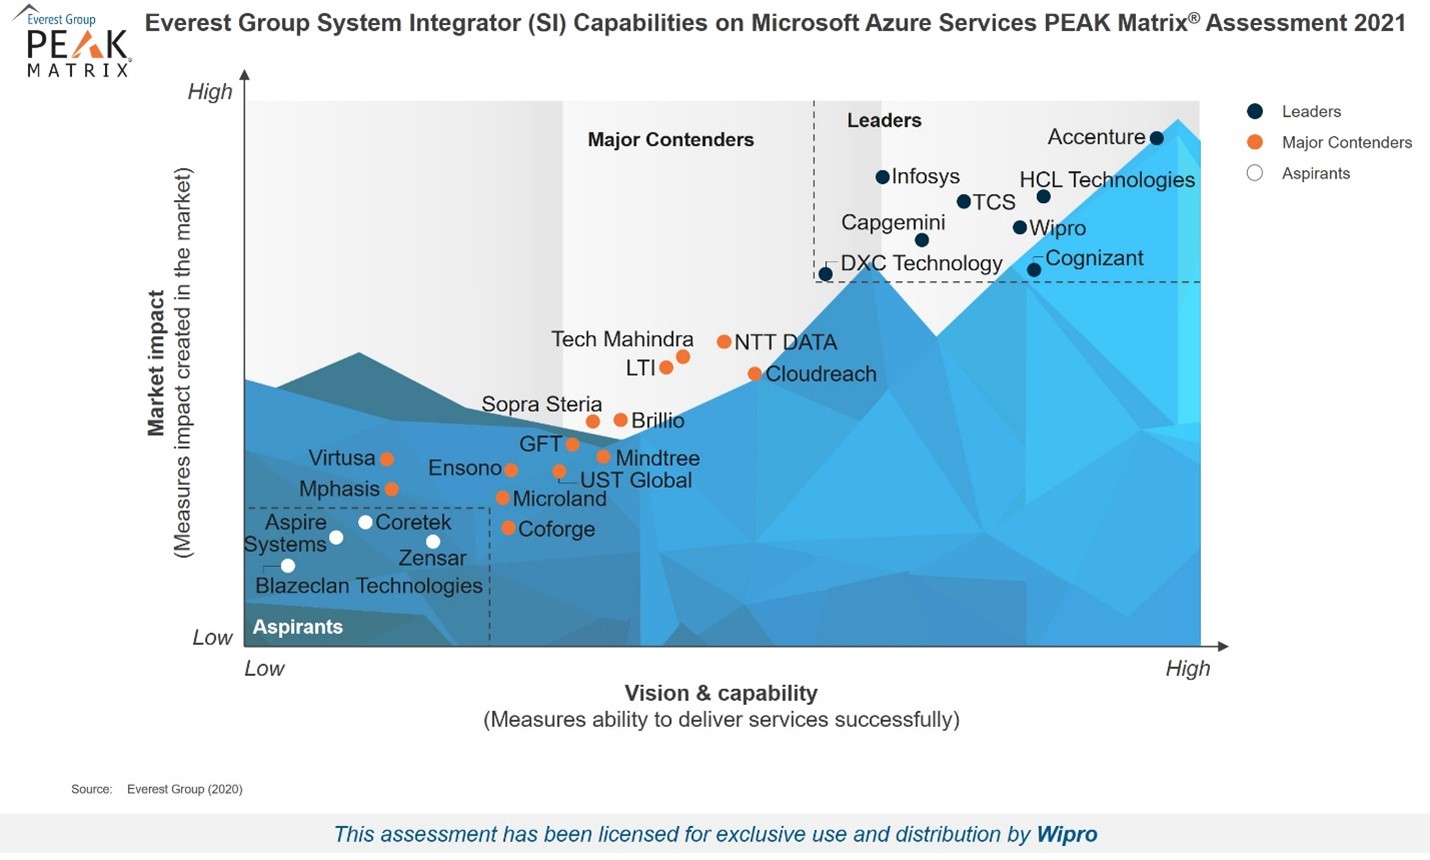 Wipro Positioned as a 'Leader' by Everest in System Integrator (SI) Capabilities on Microsoft Azure PEAK Matrix® Assessment 2021